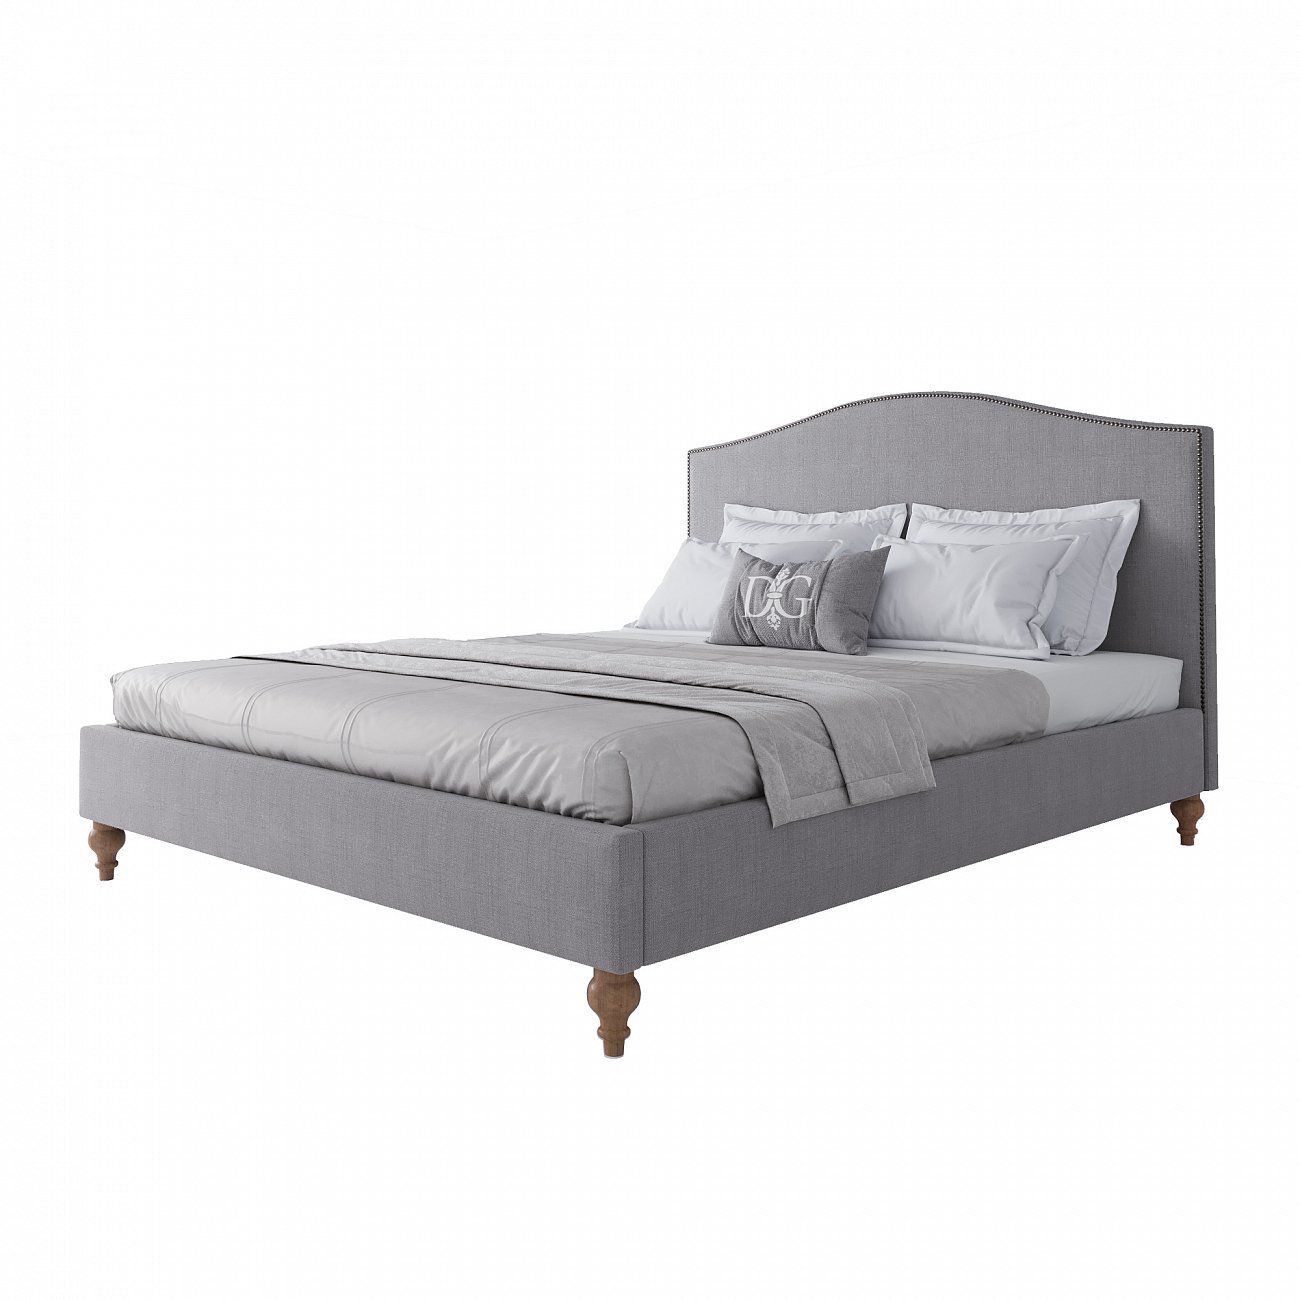 Double bed 160x200 grey matting Fleurie